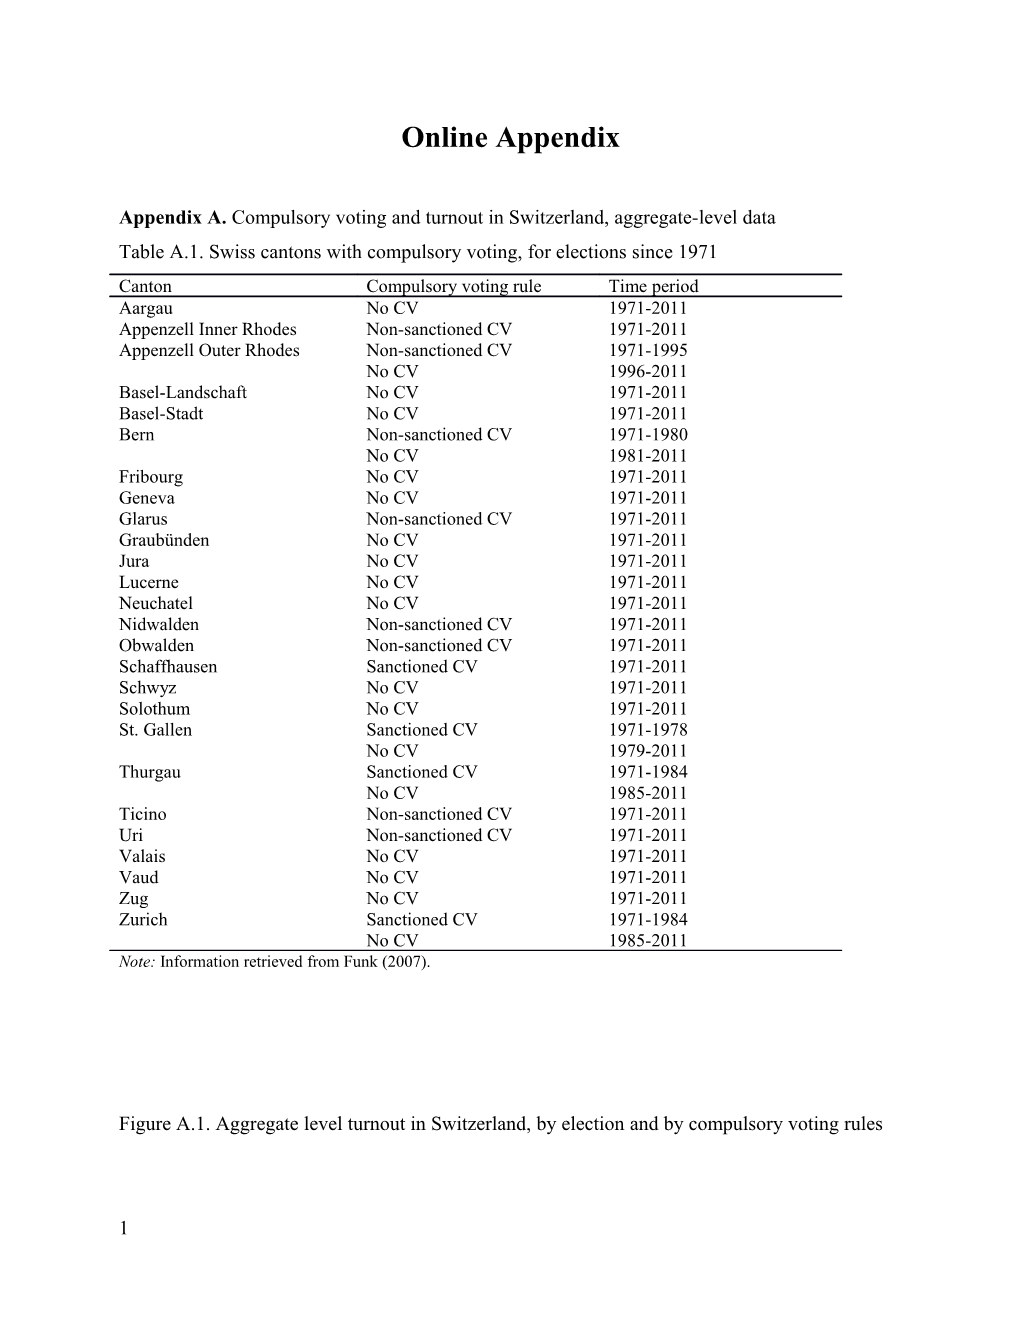 Appendix A. Compulsory Voting and Turnout in Switzerland, Aggregate-Level Data